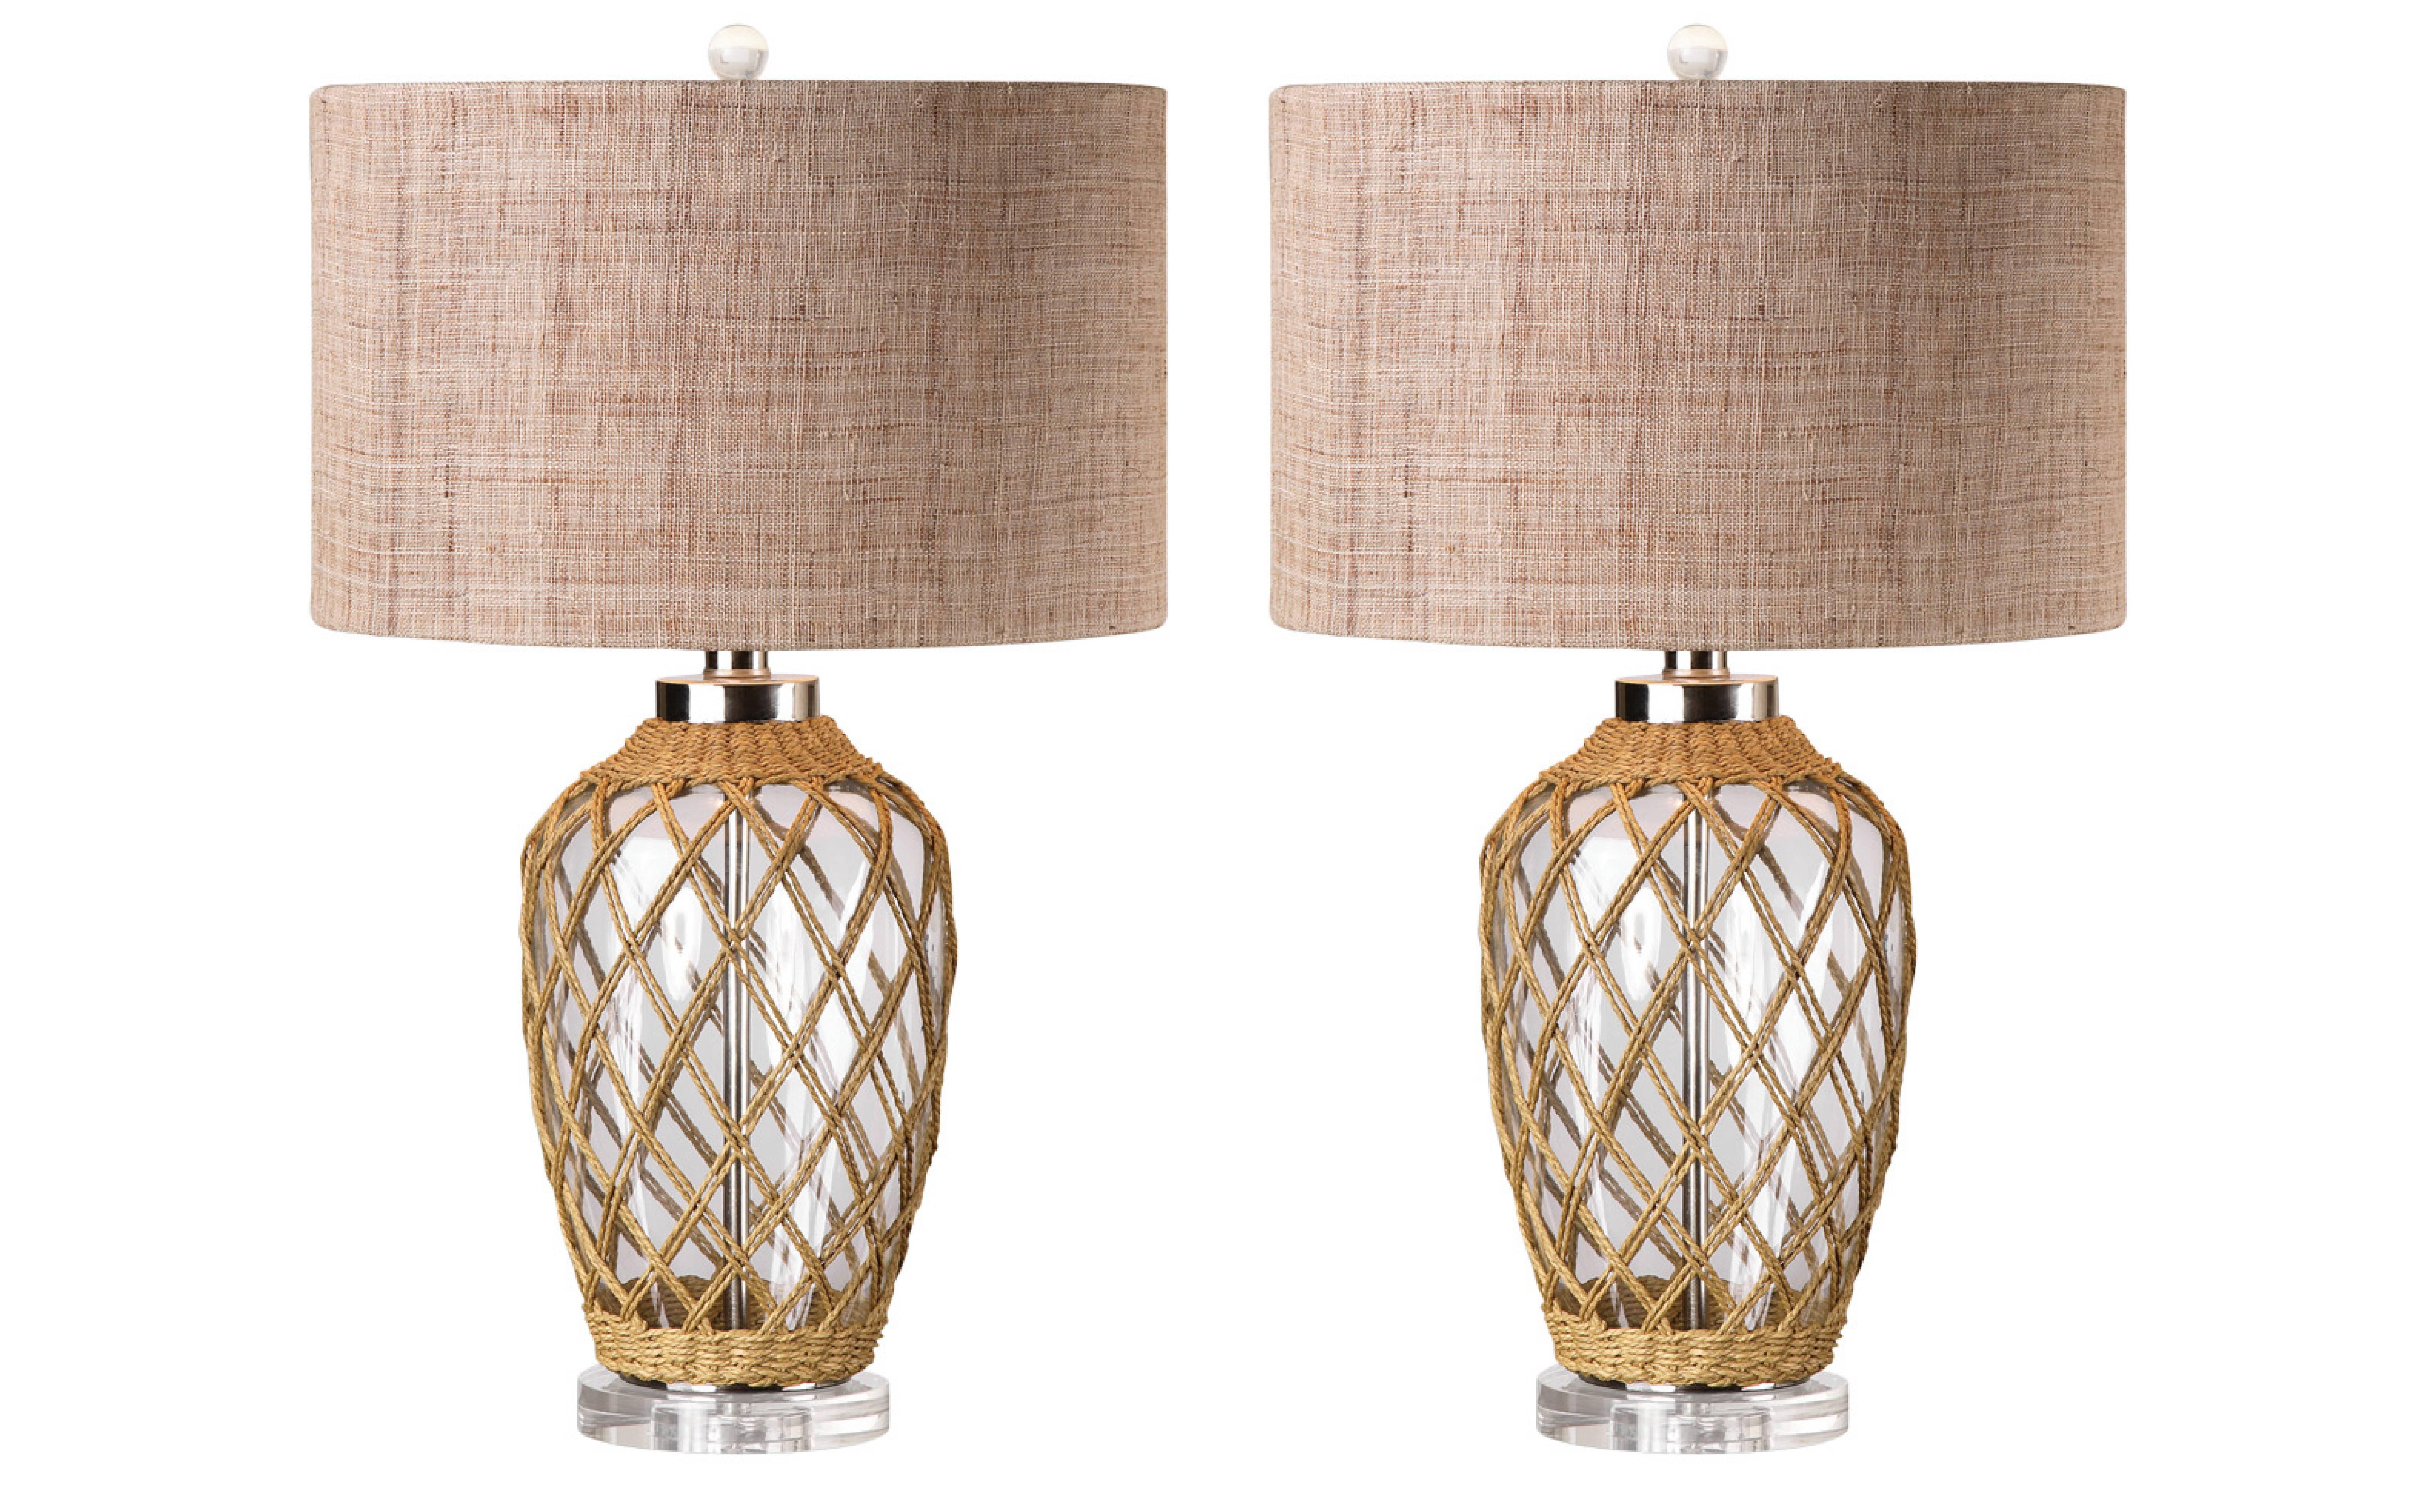 Fabulous retro lamps, looking perfectly in vogue for today.  Lucite base, glass middle and crystal topper.  Glass is wrapped in jute for a warm beach house feel.   Copper threaded burlap shades are included.   

Please inquire if you just need